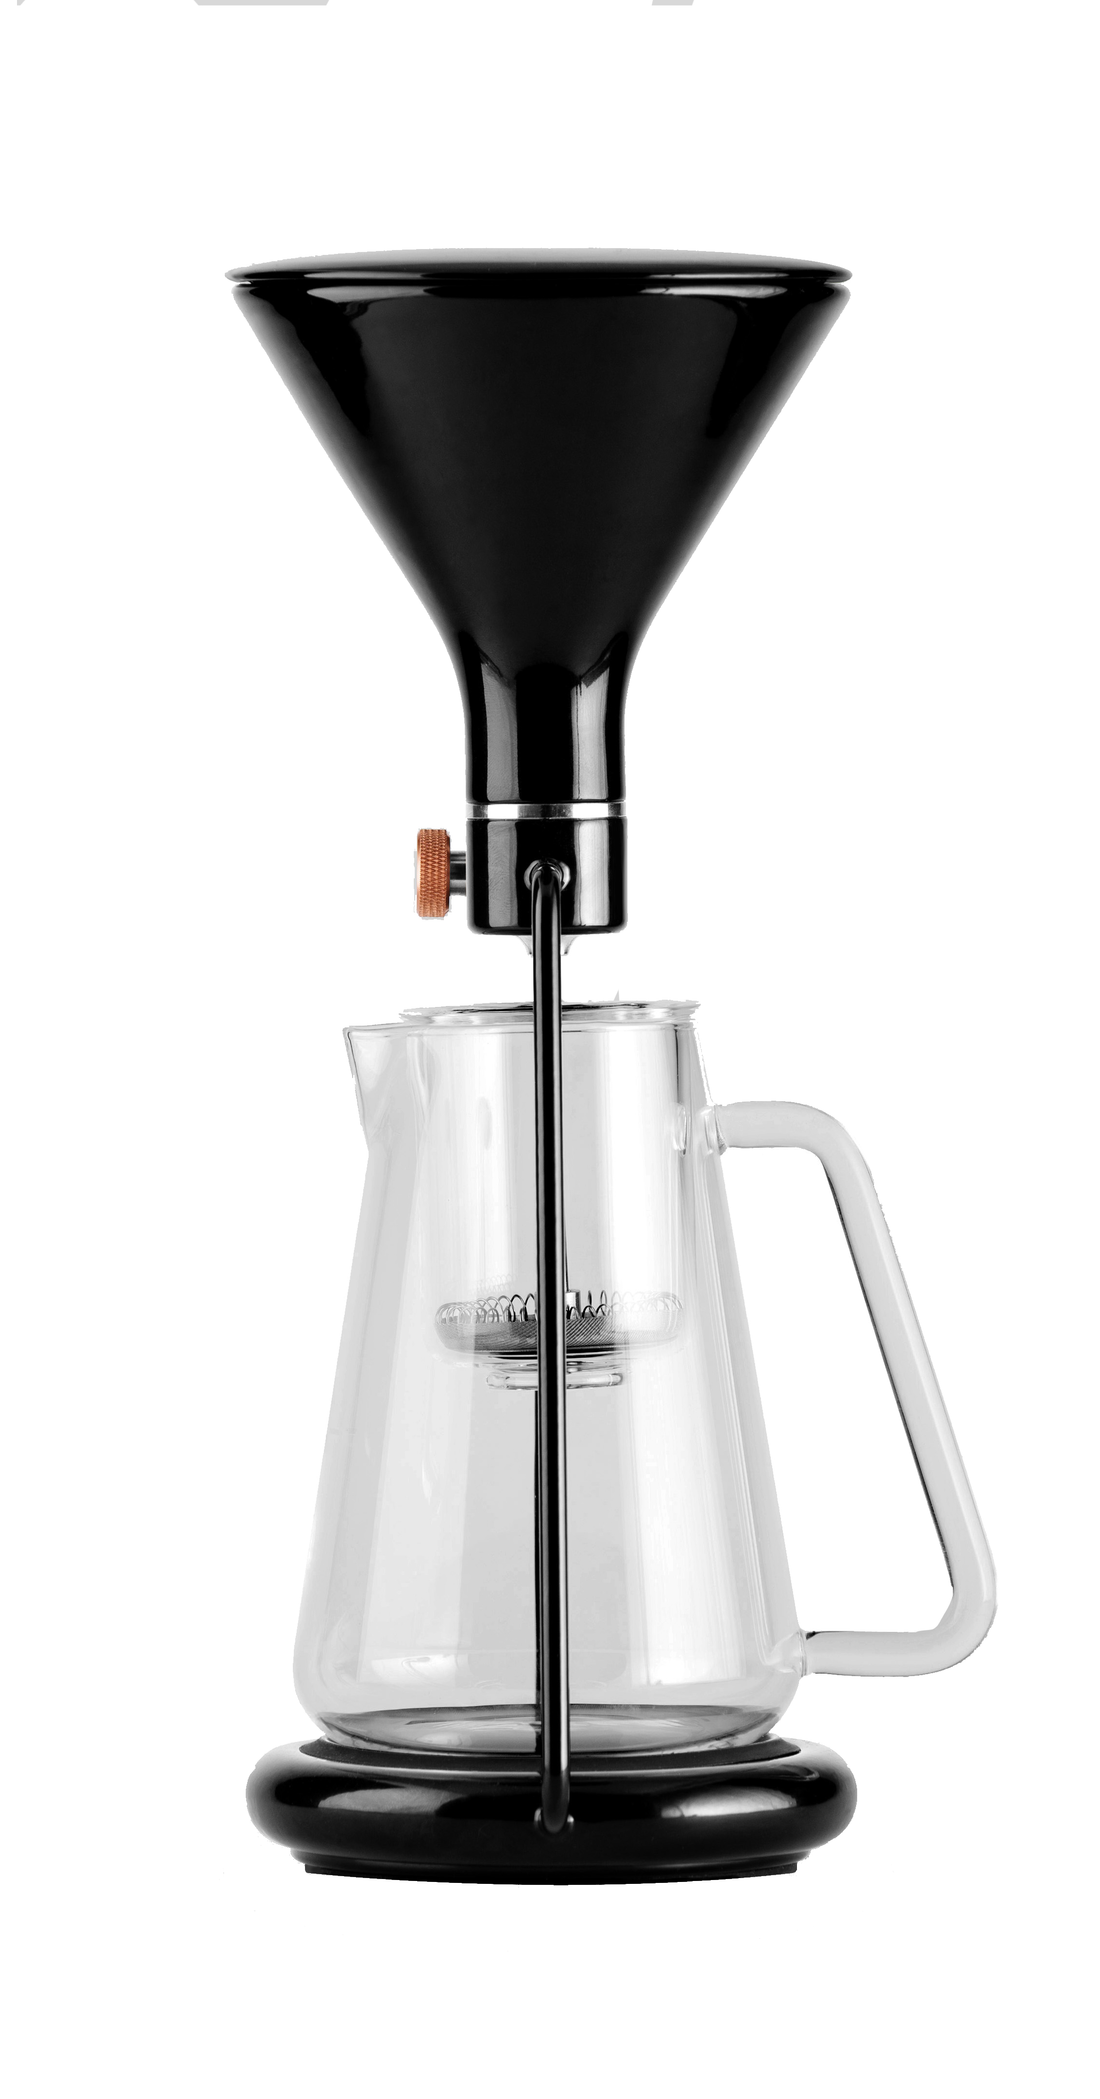 Goat Story GINA Smart Coffee Maker in Black